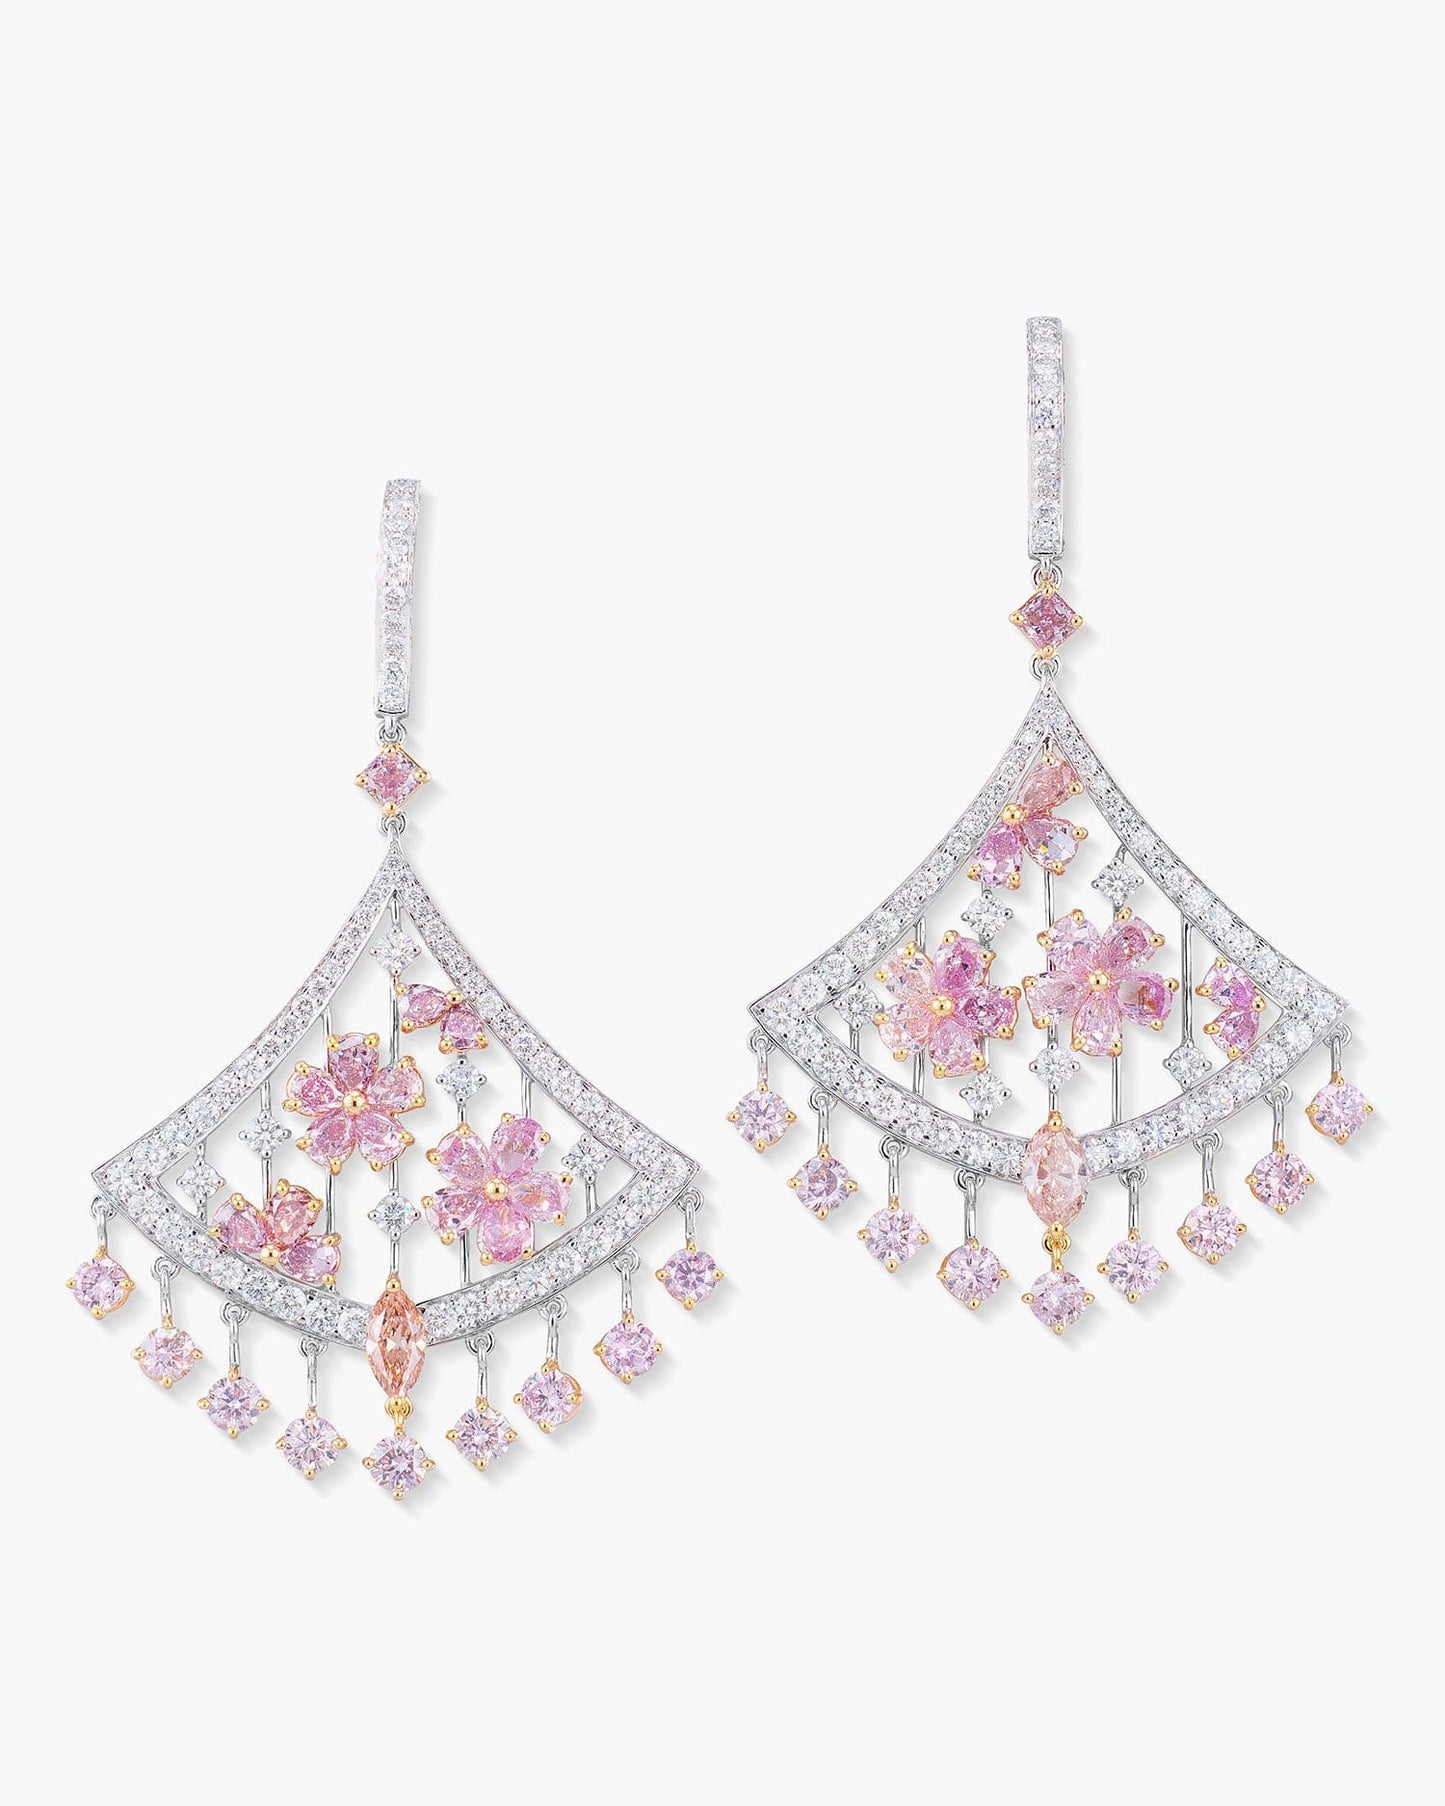 Pink and White Diamond Cherry Blossom Earrings